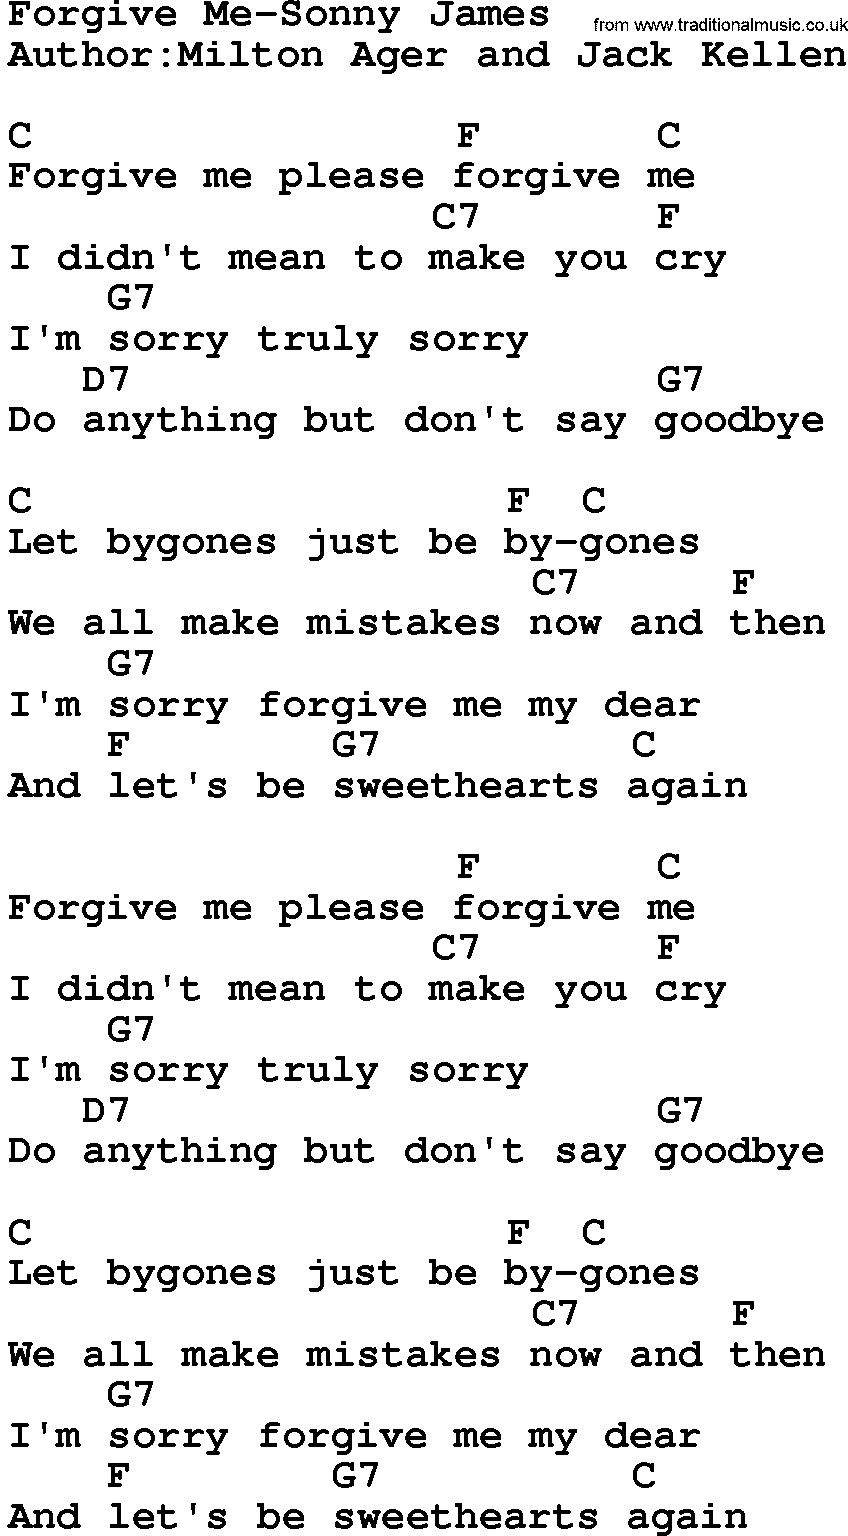 Country music song: Forgive Me-Sonny James lyrics and chords